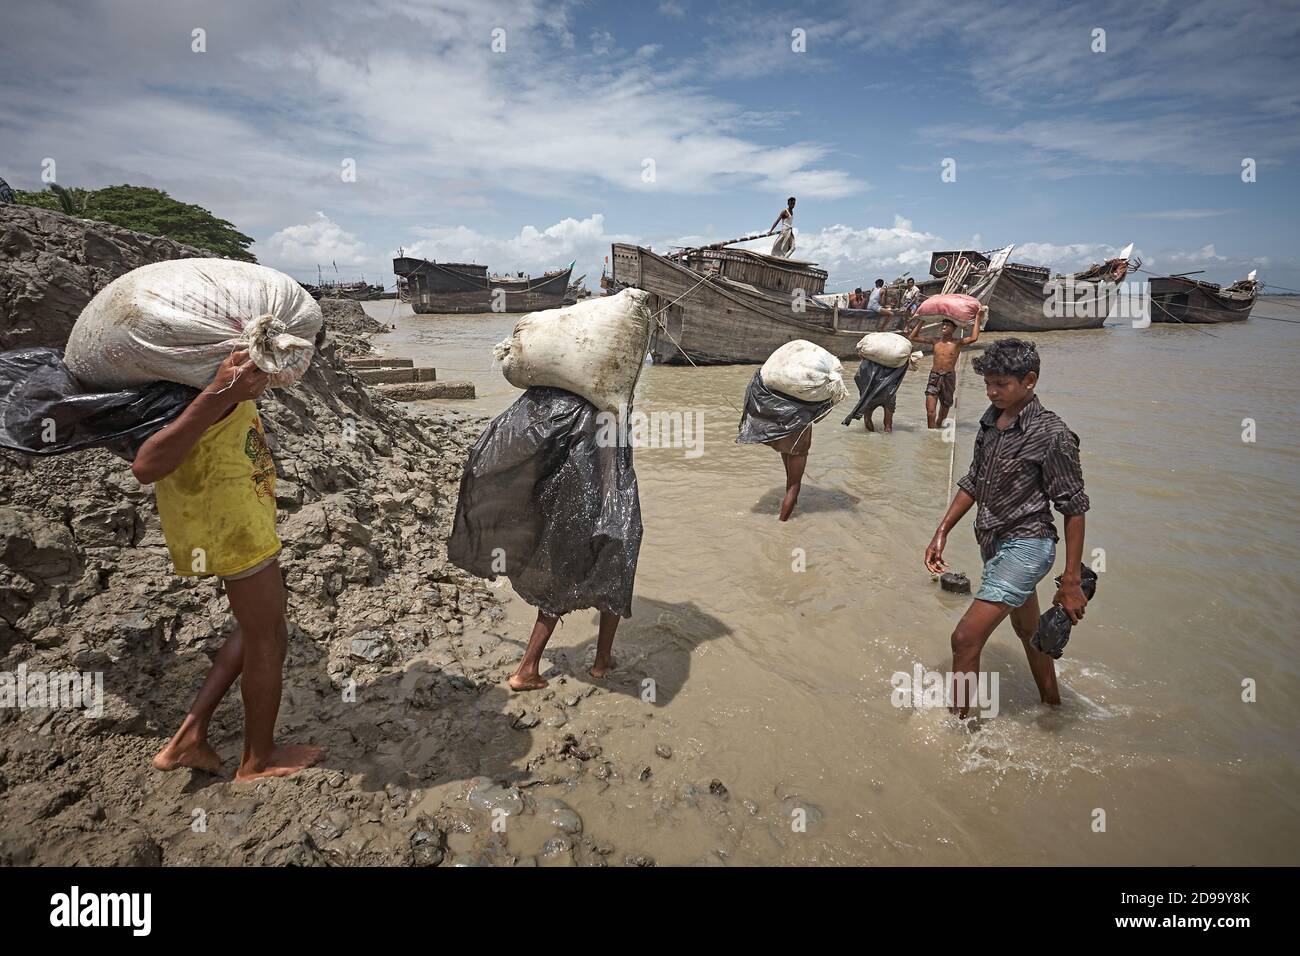 Kutubdia, Bangladesh, July 2009 - A group of people carry a boat by hand for the disappearance of the port due to rising sea levels due to climate cha Stock Photo